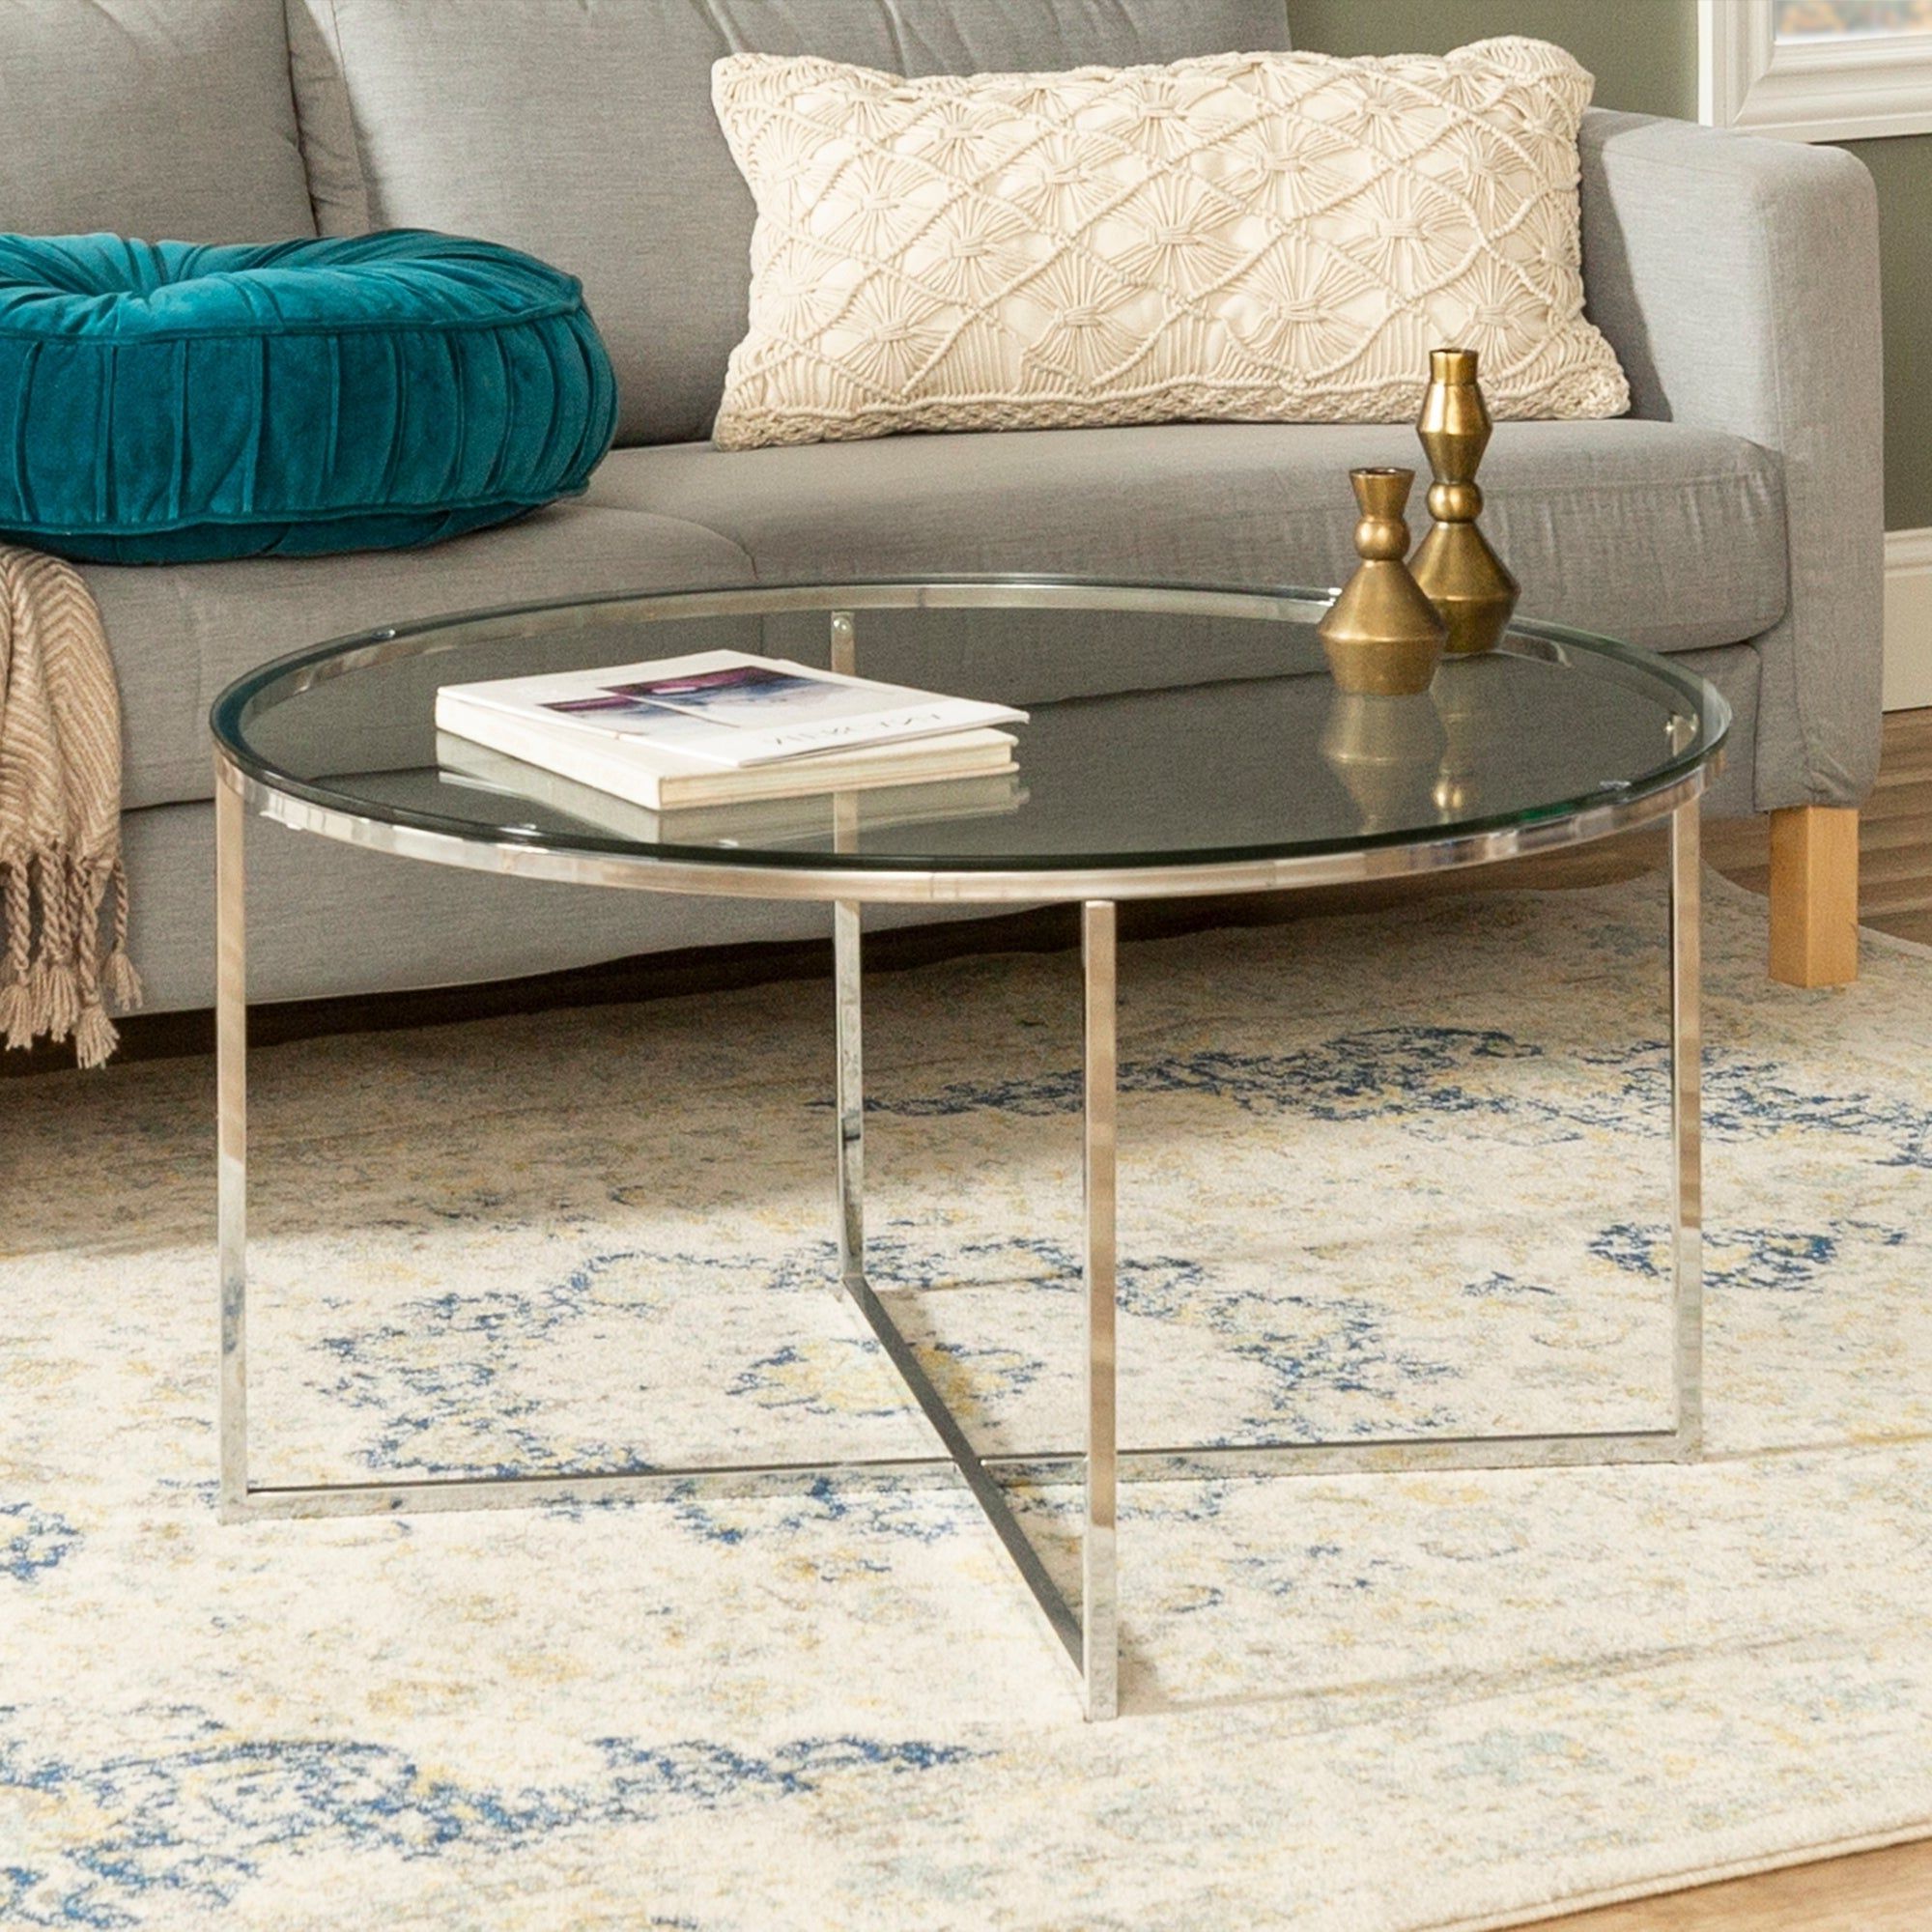 2020 Silver Orchid Ipsen Contemporary Glass Top Coffee Tables Within Silver Orchid Ipsen 36 Inch Round Coffee Table With X Base – 36 X 36 X 19h (View 17 of 20)